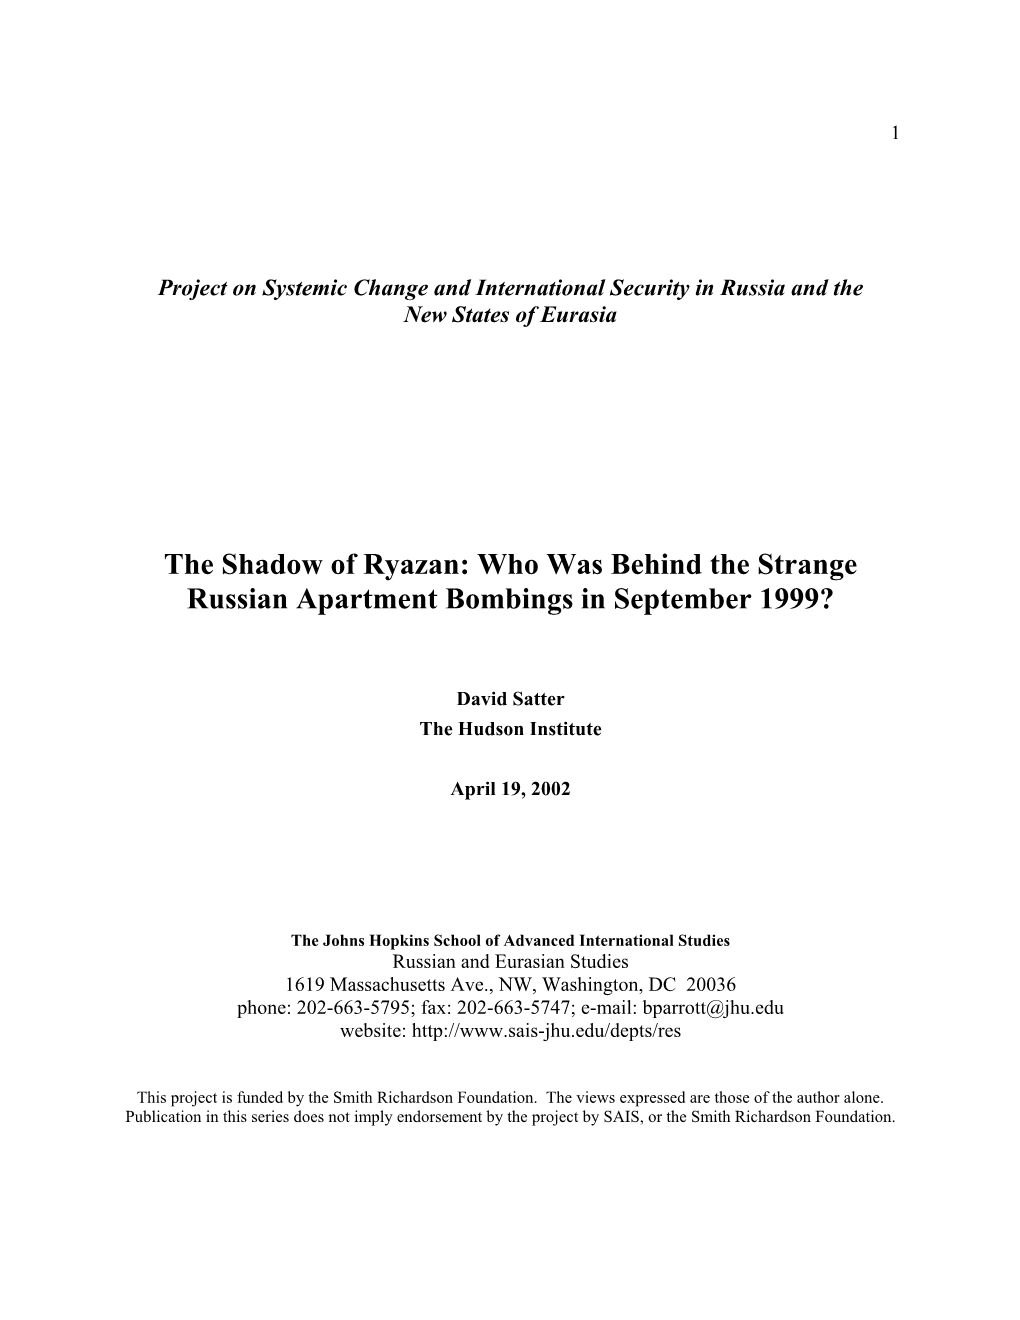 The Shadow of Ryazan: Who Was Behind the Strange Russian Apartment Bombings in September 1999?